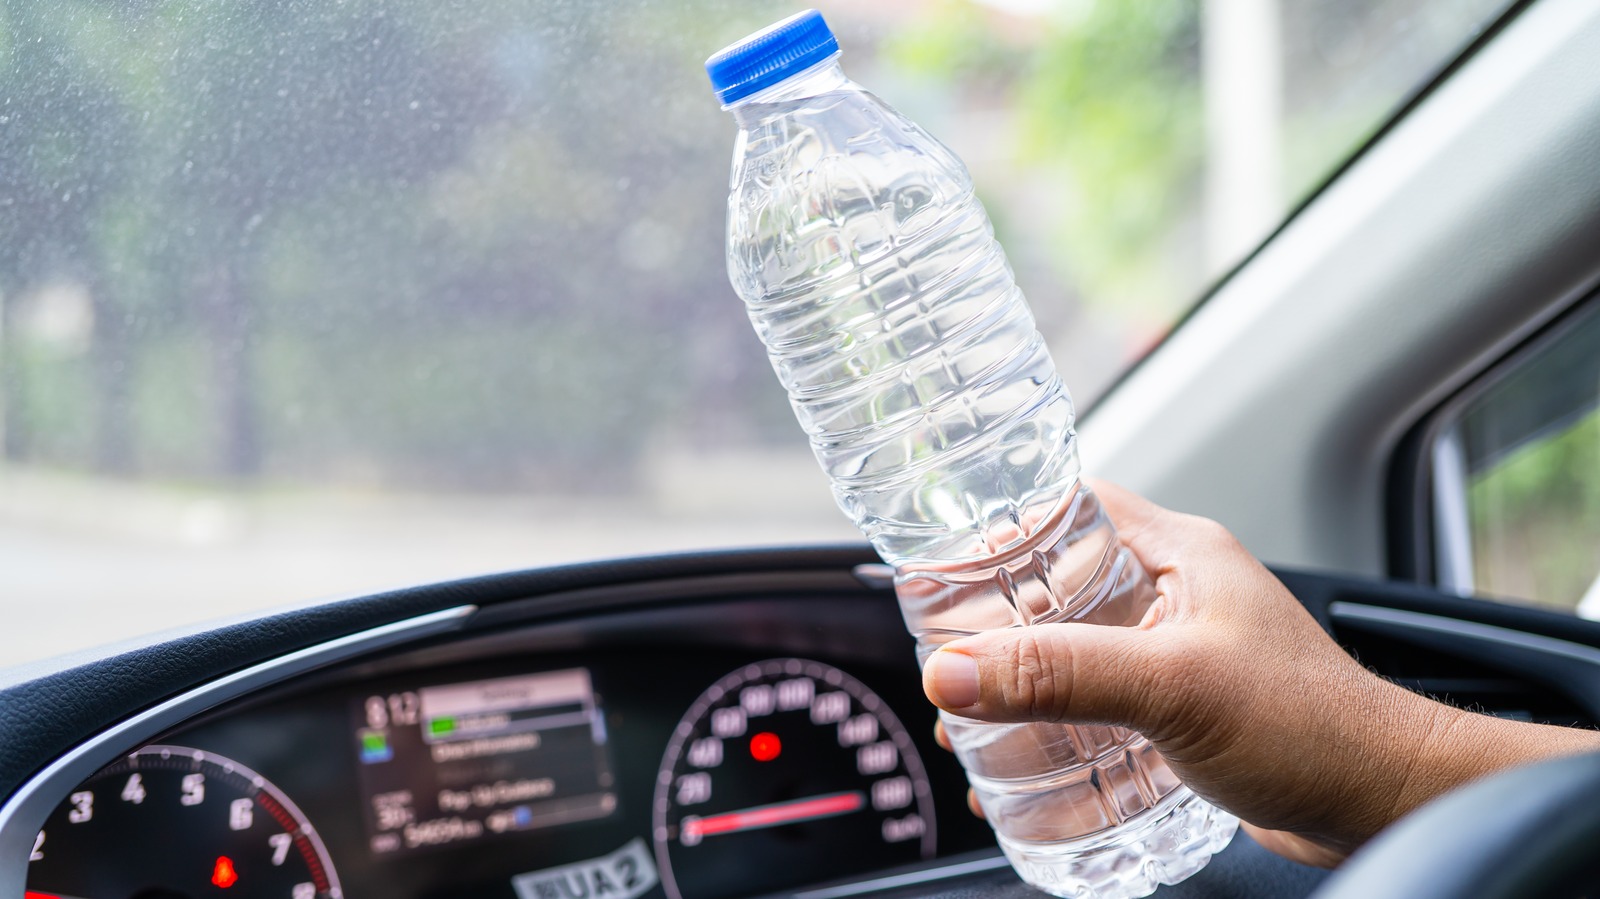 https://www.healthdigest.com/img/gallery/is-drinking-from-a-plastic-water-bottle-left-in-a-hot-car-safe/l-intro-1648313015.jpg